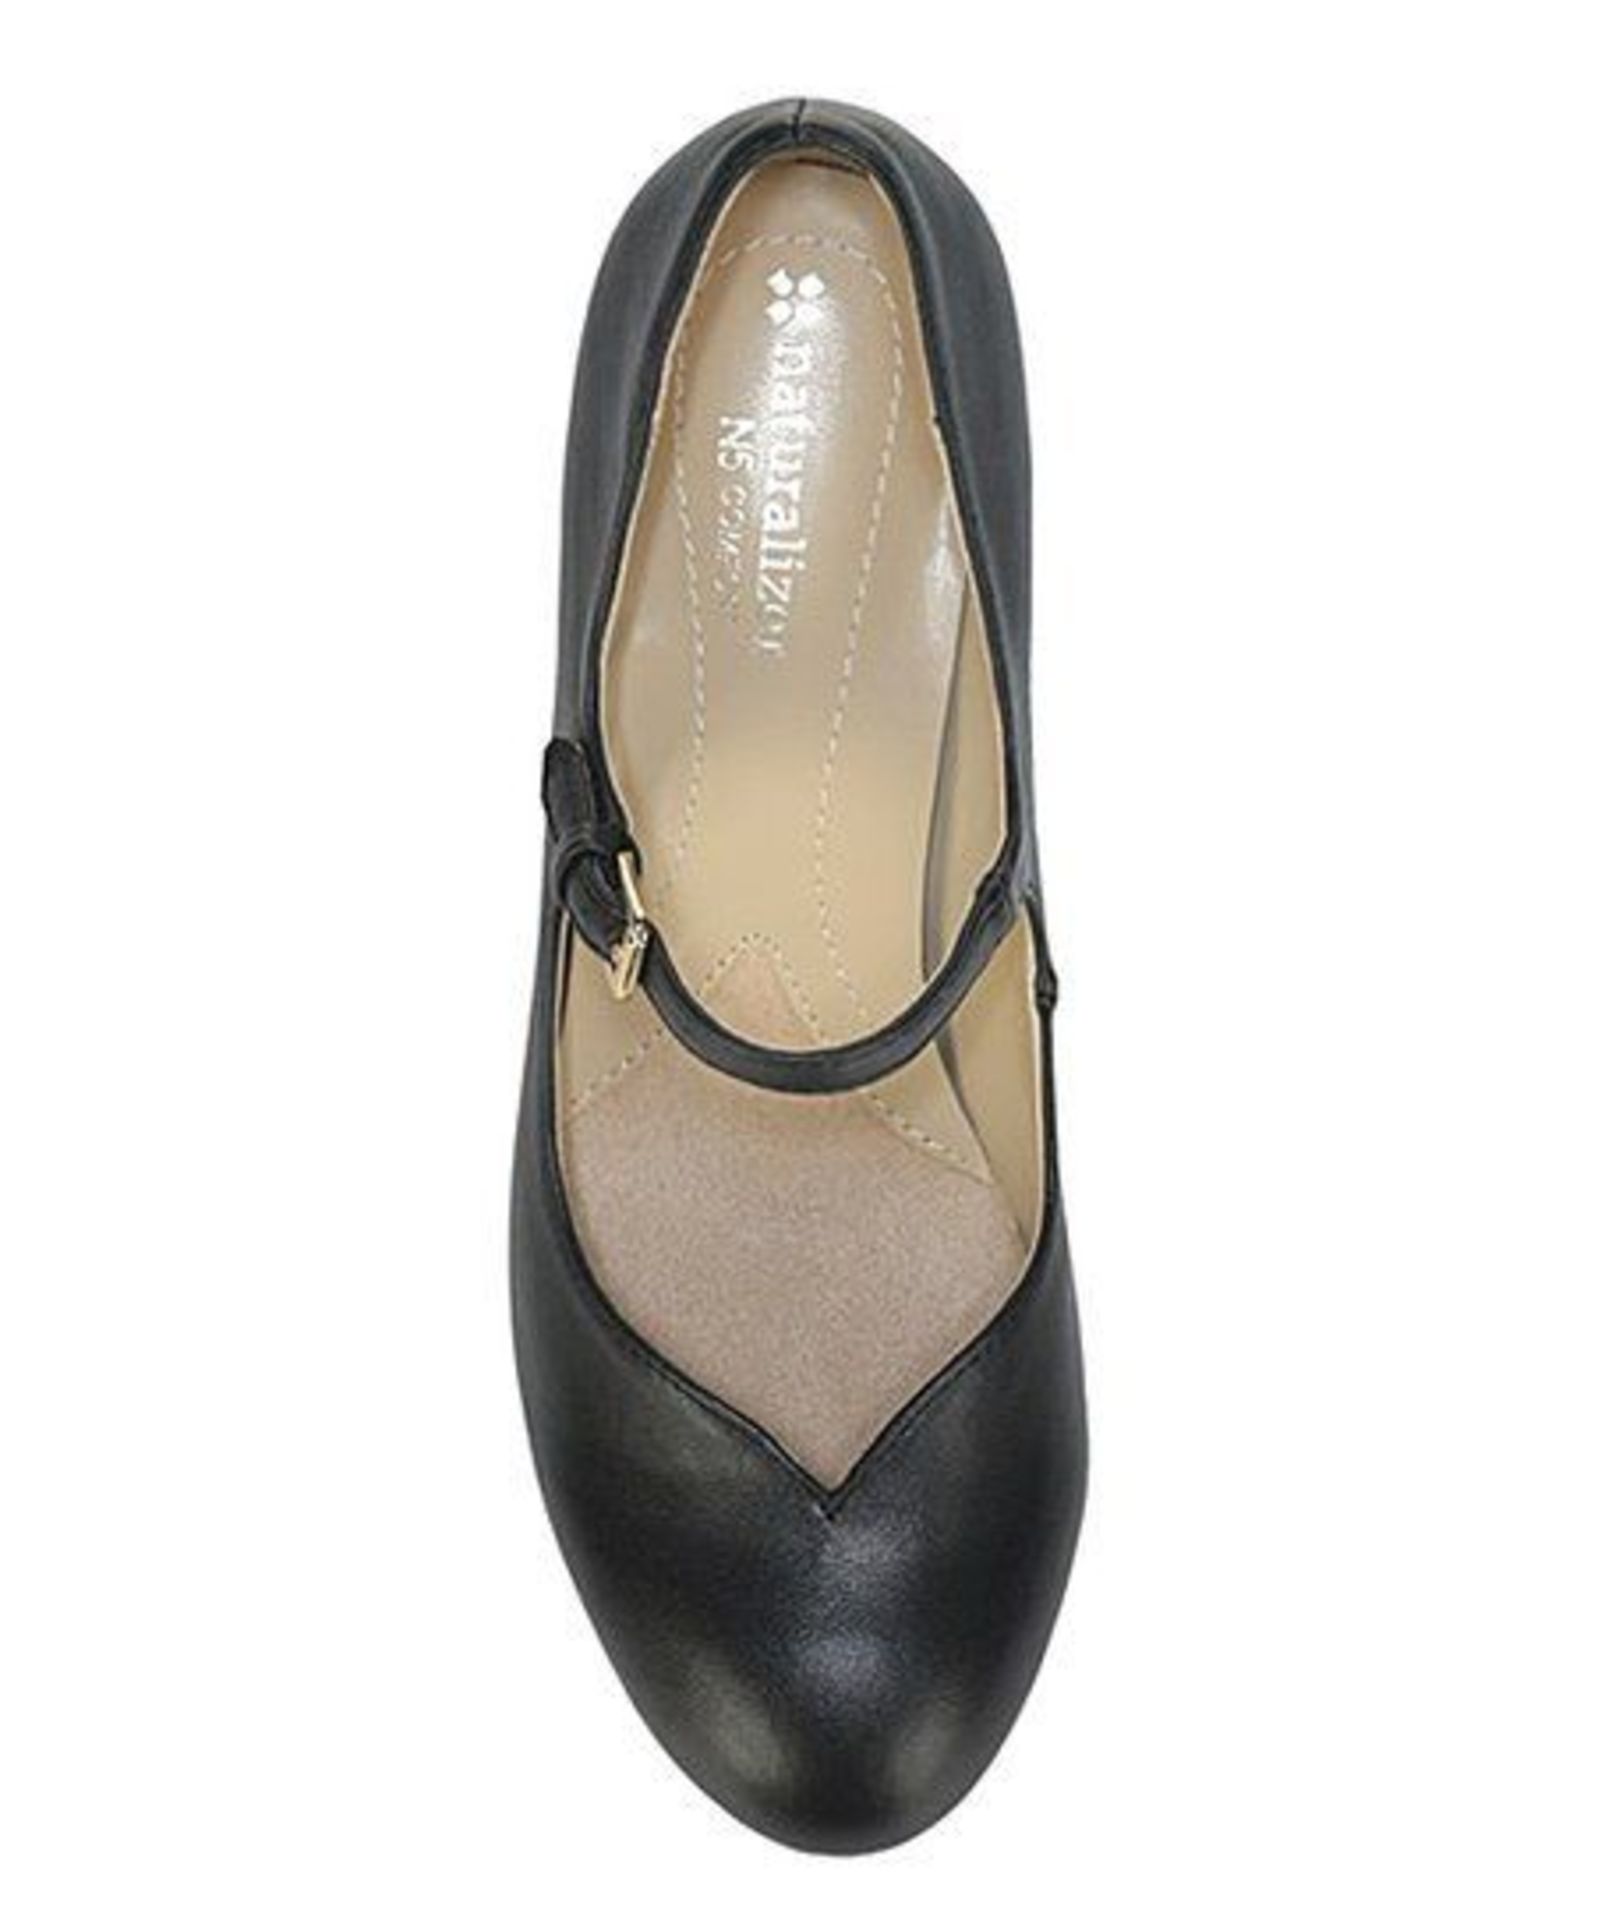 Naturalizer, Black Believe Pump, Size Uk 3.5-4 Eur 35.5 (New With Box) [Ref: 40957397 B] - Image 4 of 5